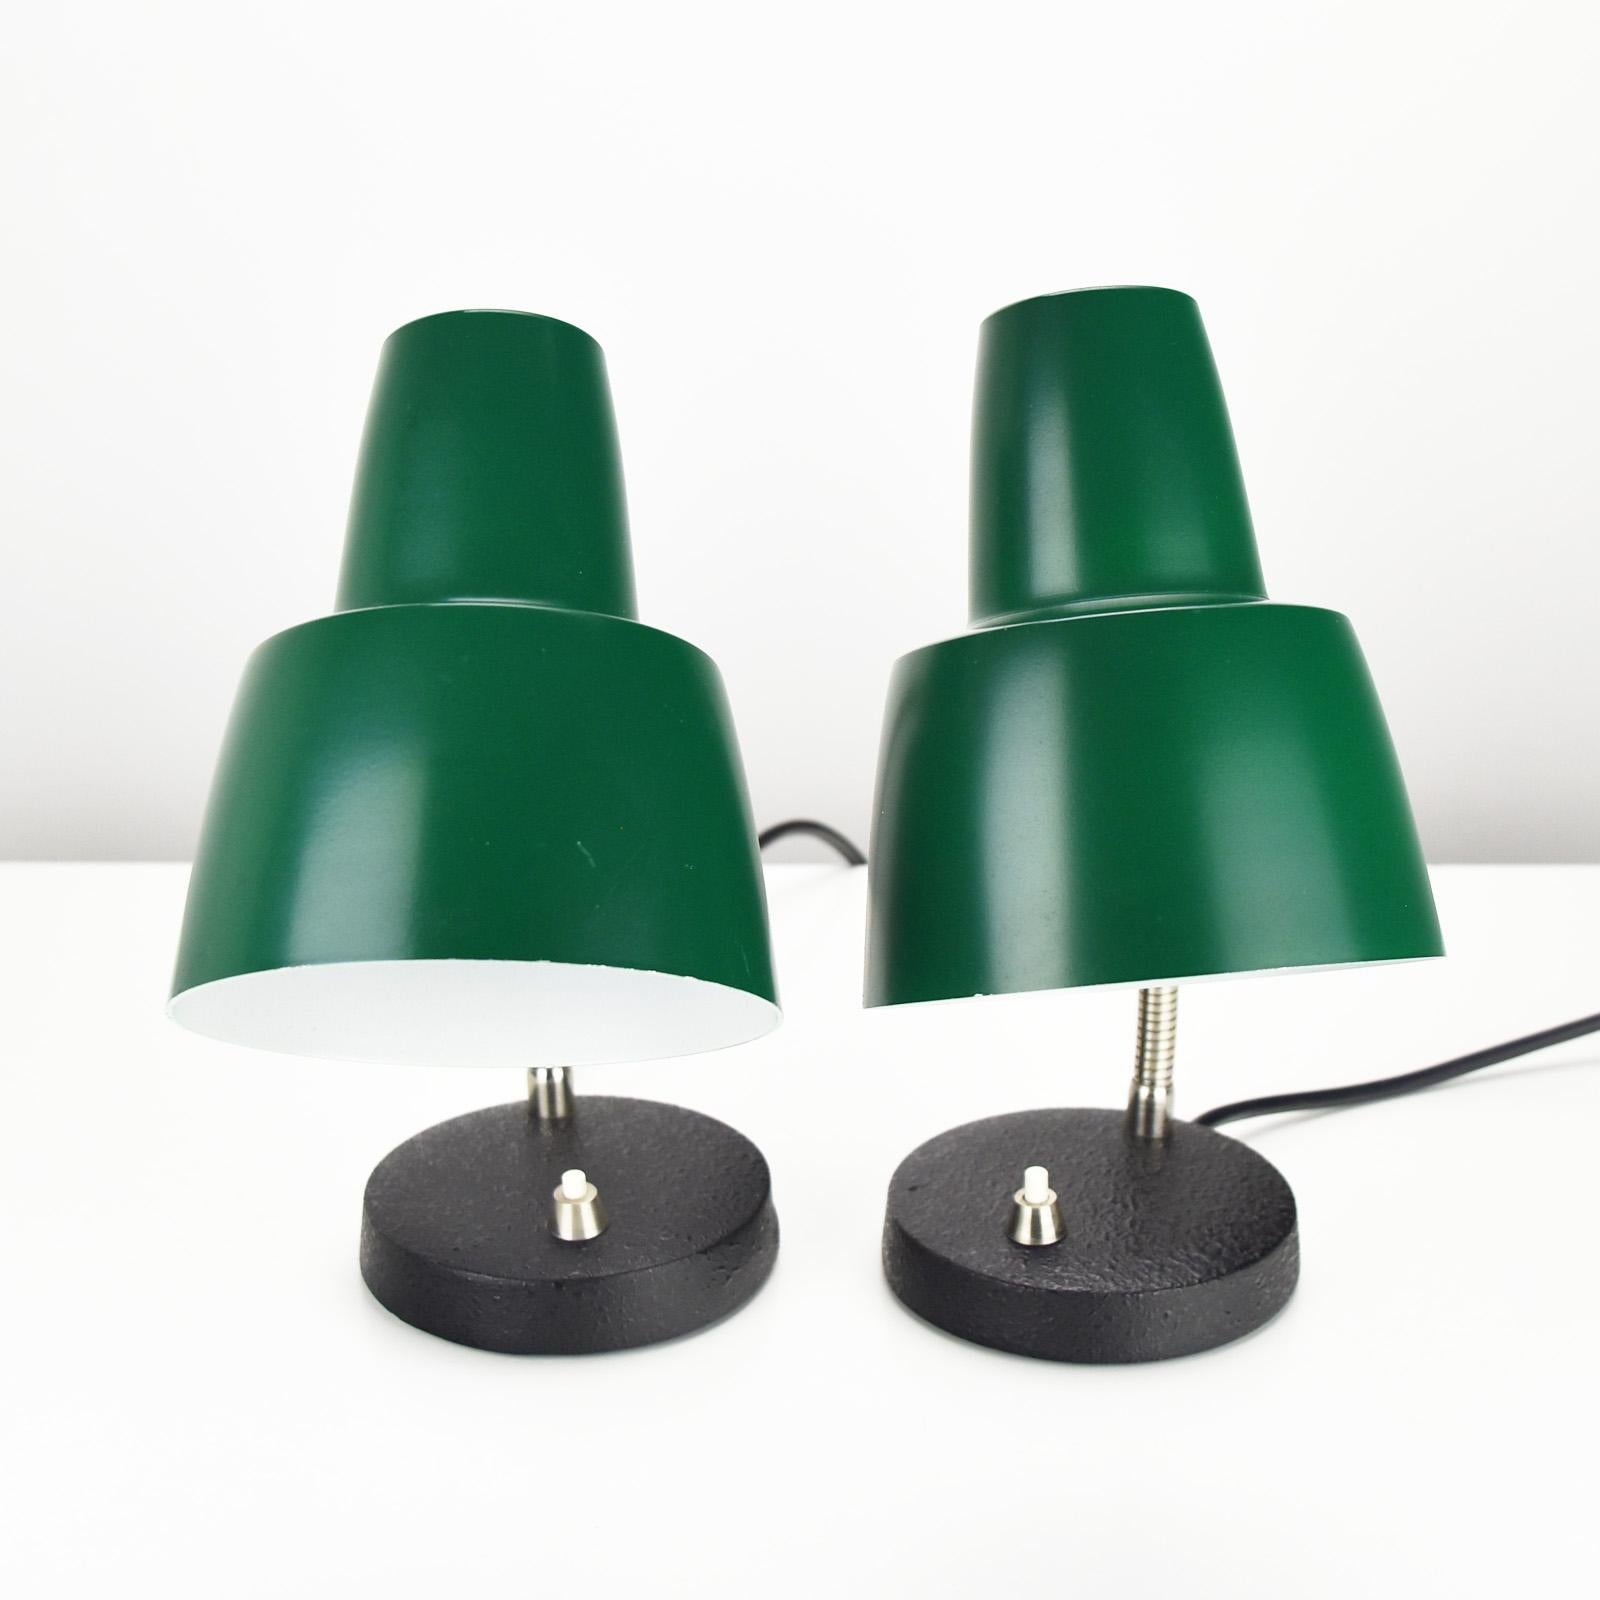 Nice pair of bed side table lamp by the German manufacturer Hillebrand dating to the 1960s. 
The lamps are in pristine condition, cleaned and full in function. 
The base is made of black patinated cast iron, chromed gooseneck and green lacquered